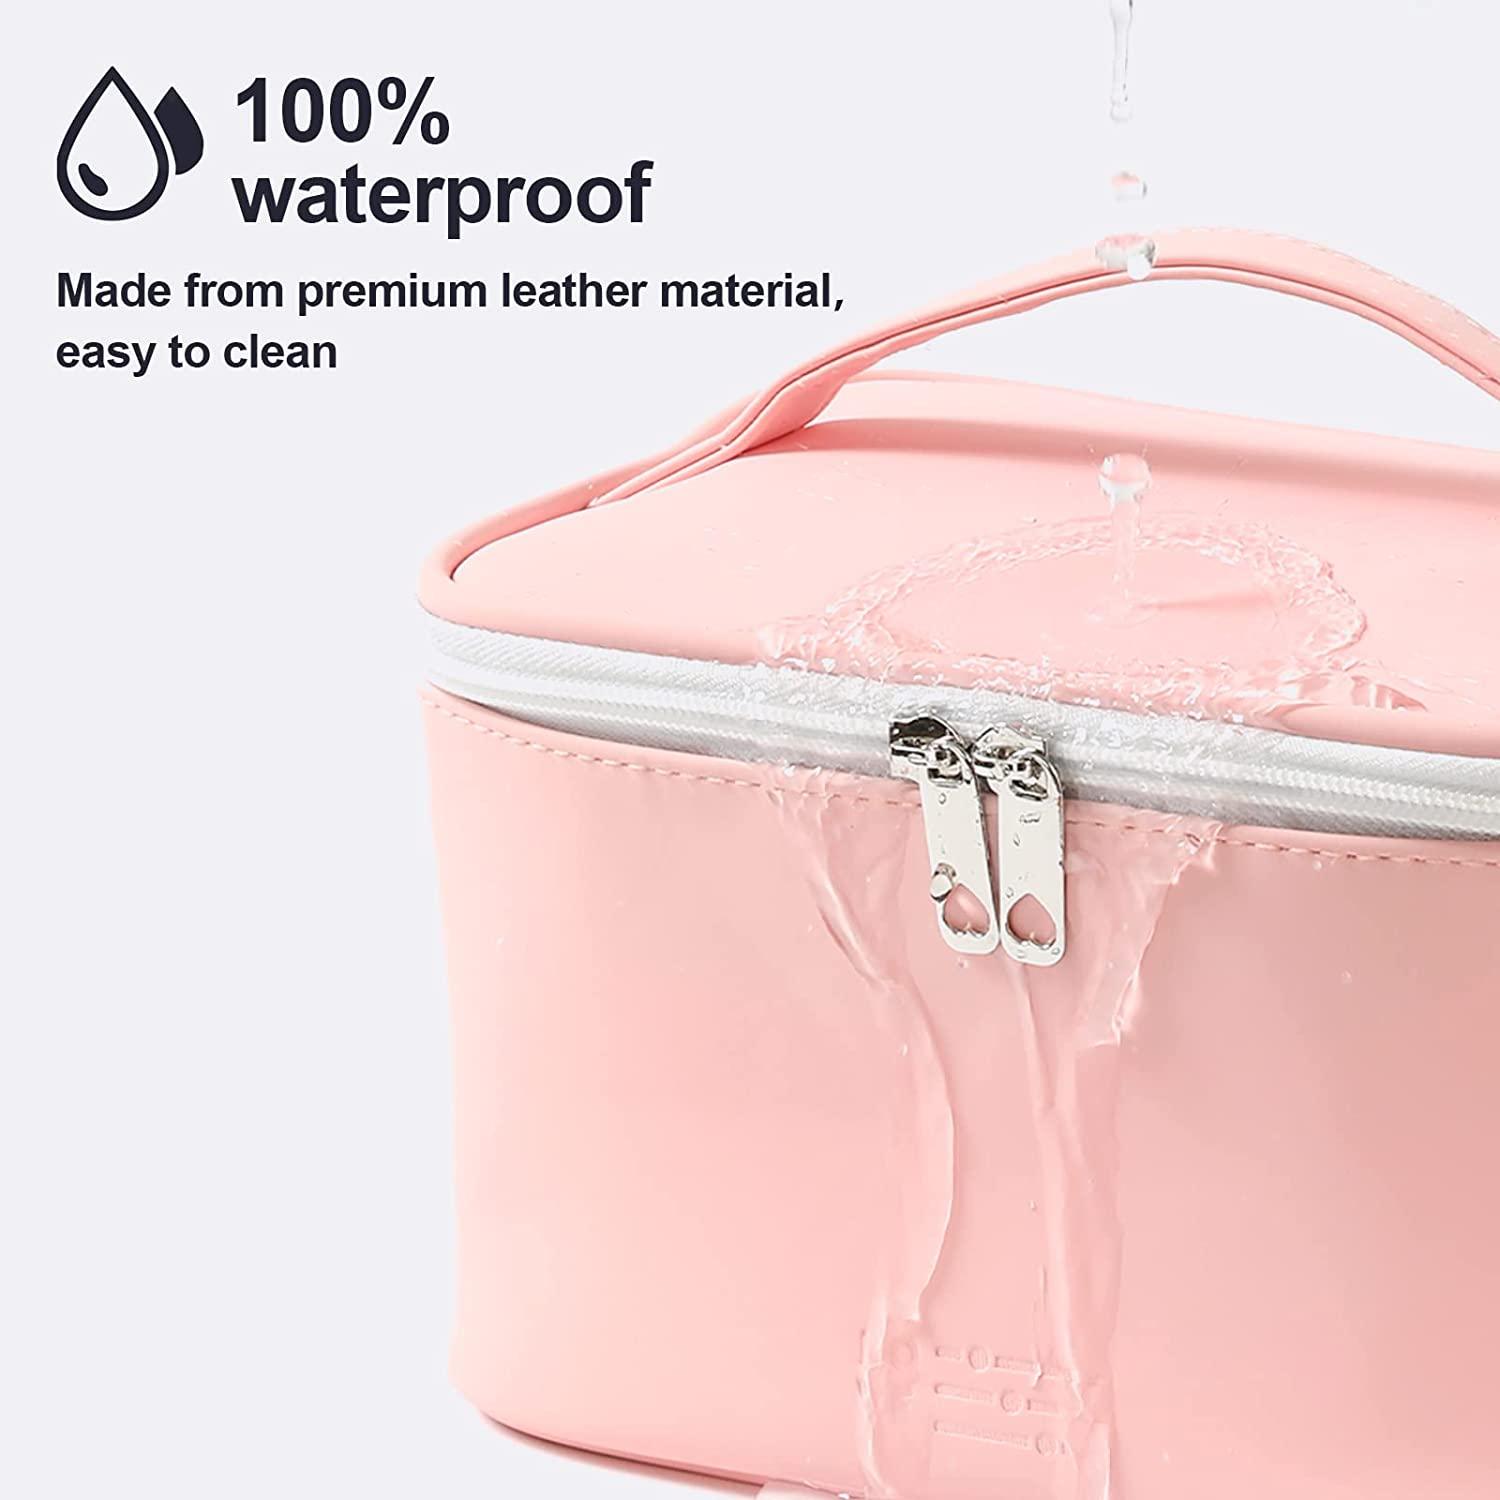  Travel Makeup Bag Marble Texture Print Portable Waterproof Cosmetic  Bag with Zipper, PU Leather Toiletry Bag, Travel Cosmetic Organizer Bag,  Accessories Makeup Pouch for Women Girls : Beauty & Personal Care